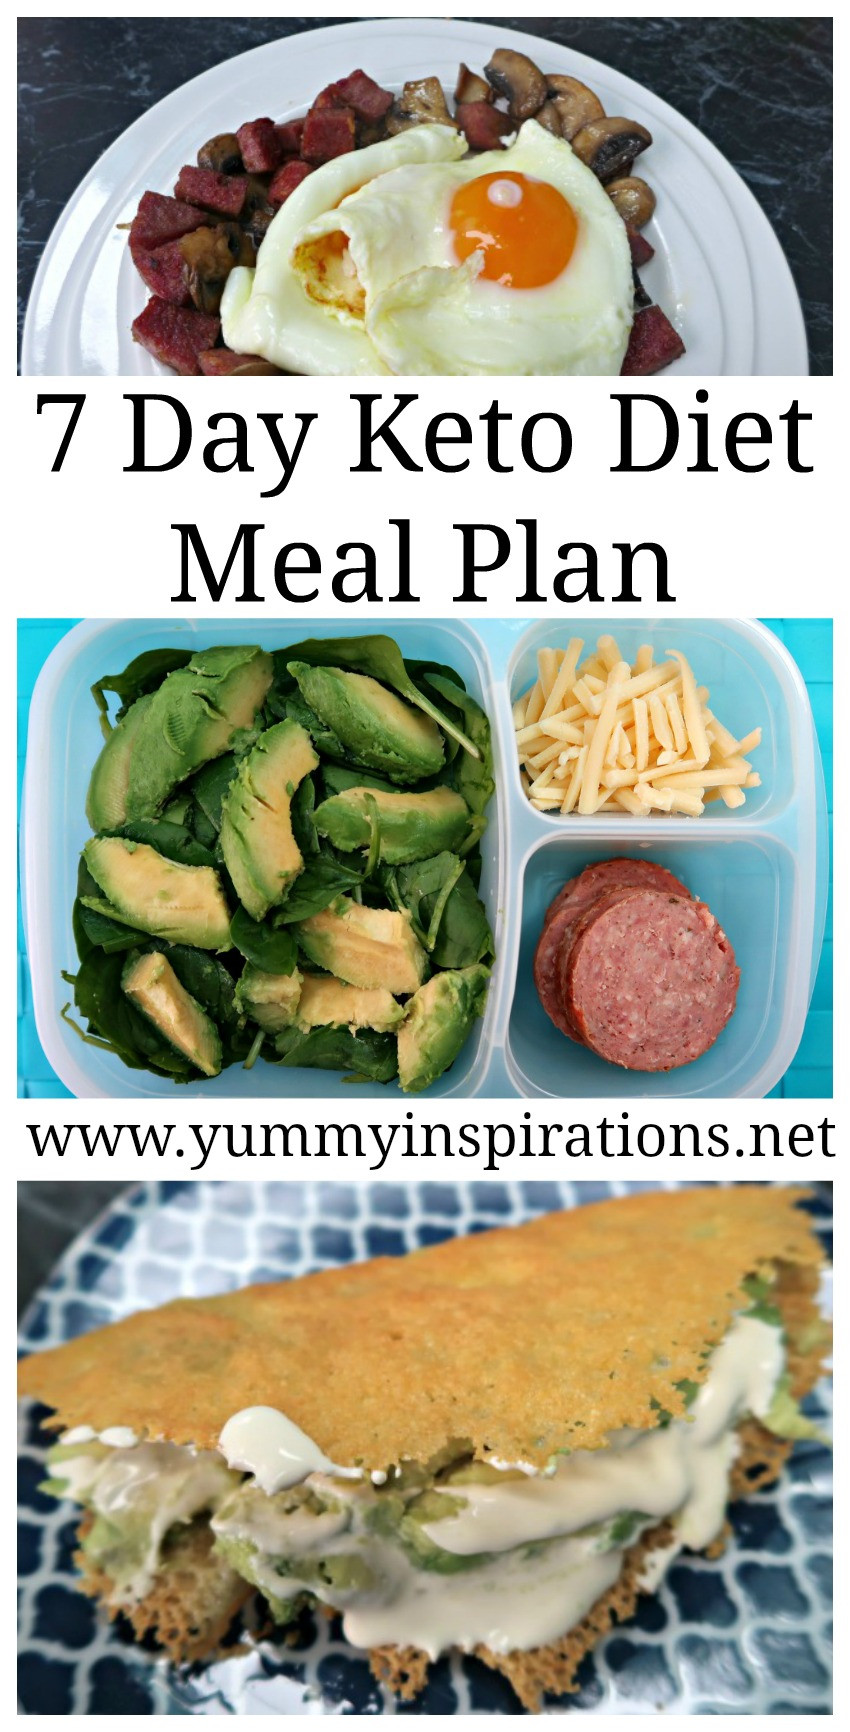 Pinterest Keto Diet
 7 Day Keto Diet Meal Plan For Weight Loss Ketogenic Foods